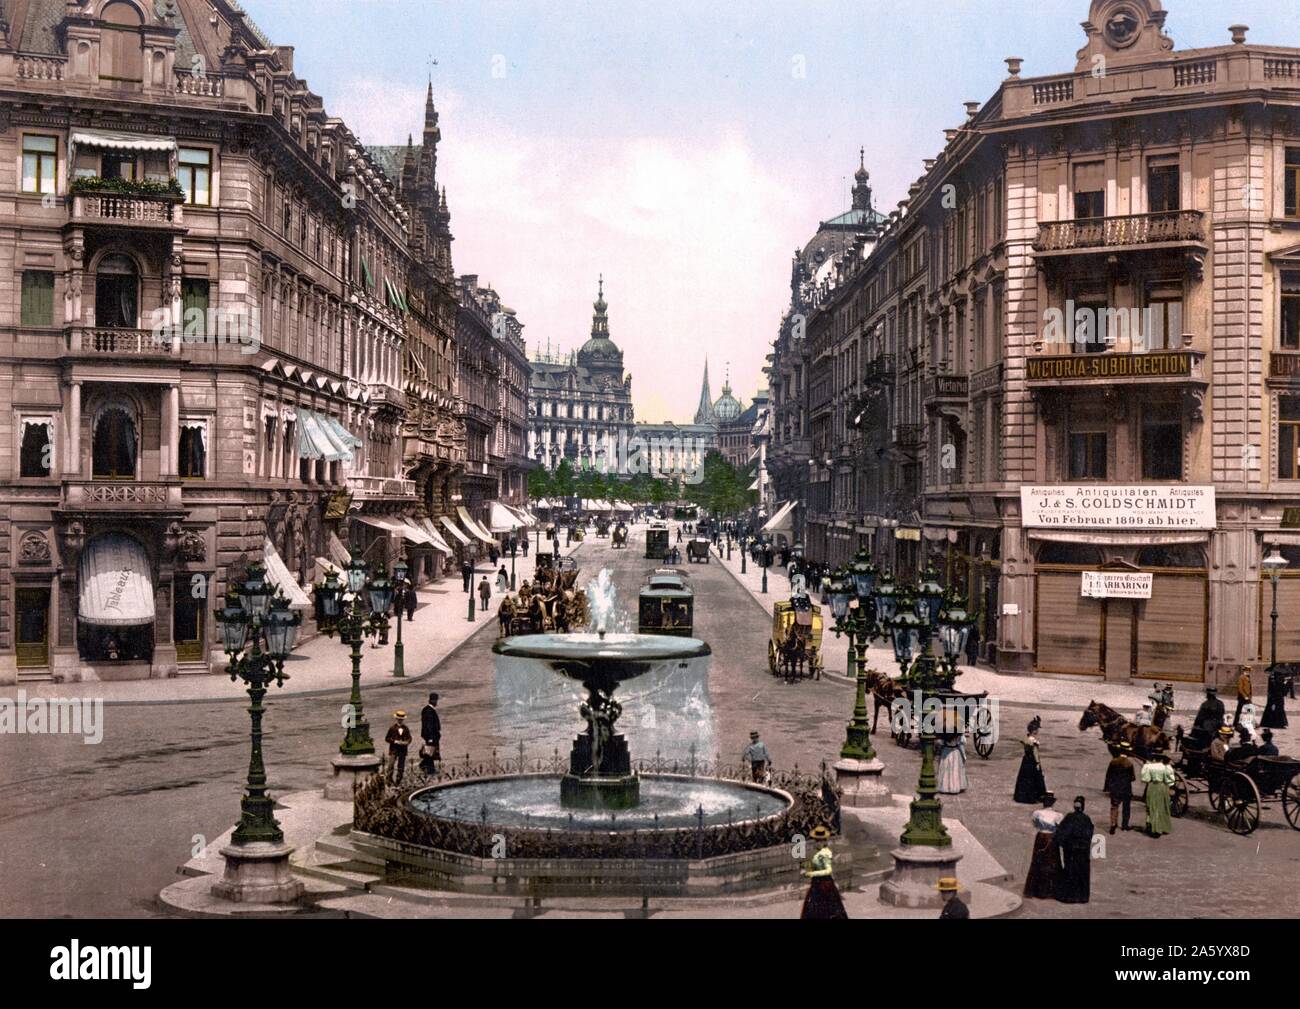 Street scene in Kaiserstrasse, Frankfurt in Germany 1903. The Jewish owned, art and antique firm of J & S Goldschmidt, was the royal purveyor to the Tsar of Russia before WWI. Stock Photo